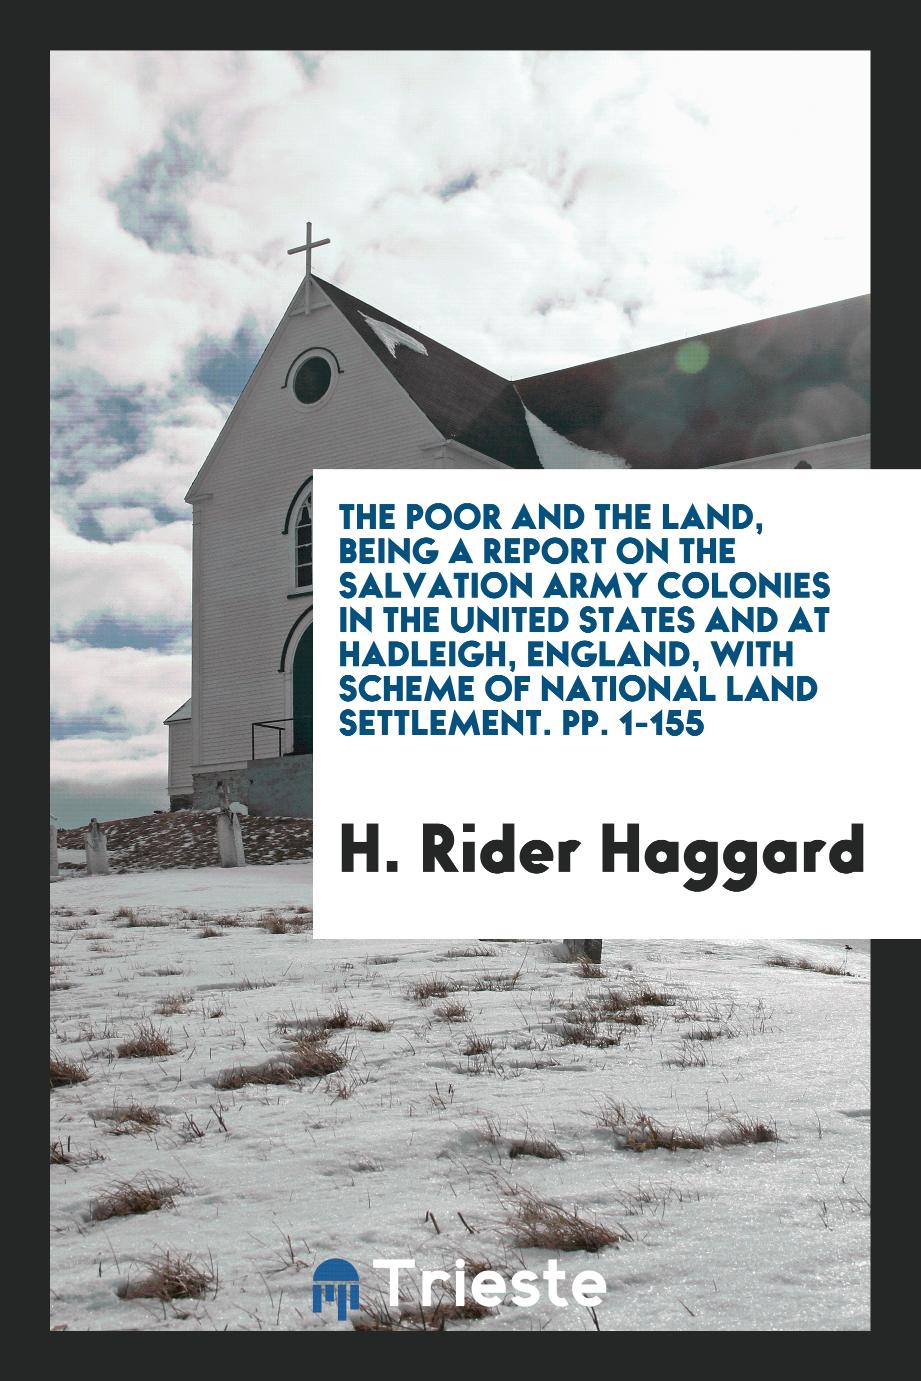 The Poor and the Land, Being a Report on the Salvation Army Colonies in the United States and at Hadleigh, England, with Scheme of National Land Settlement. pp. 1-155